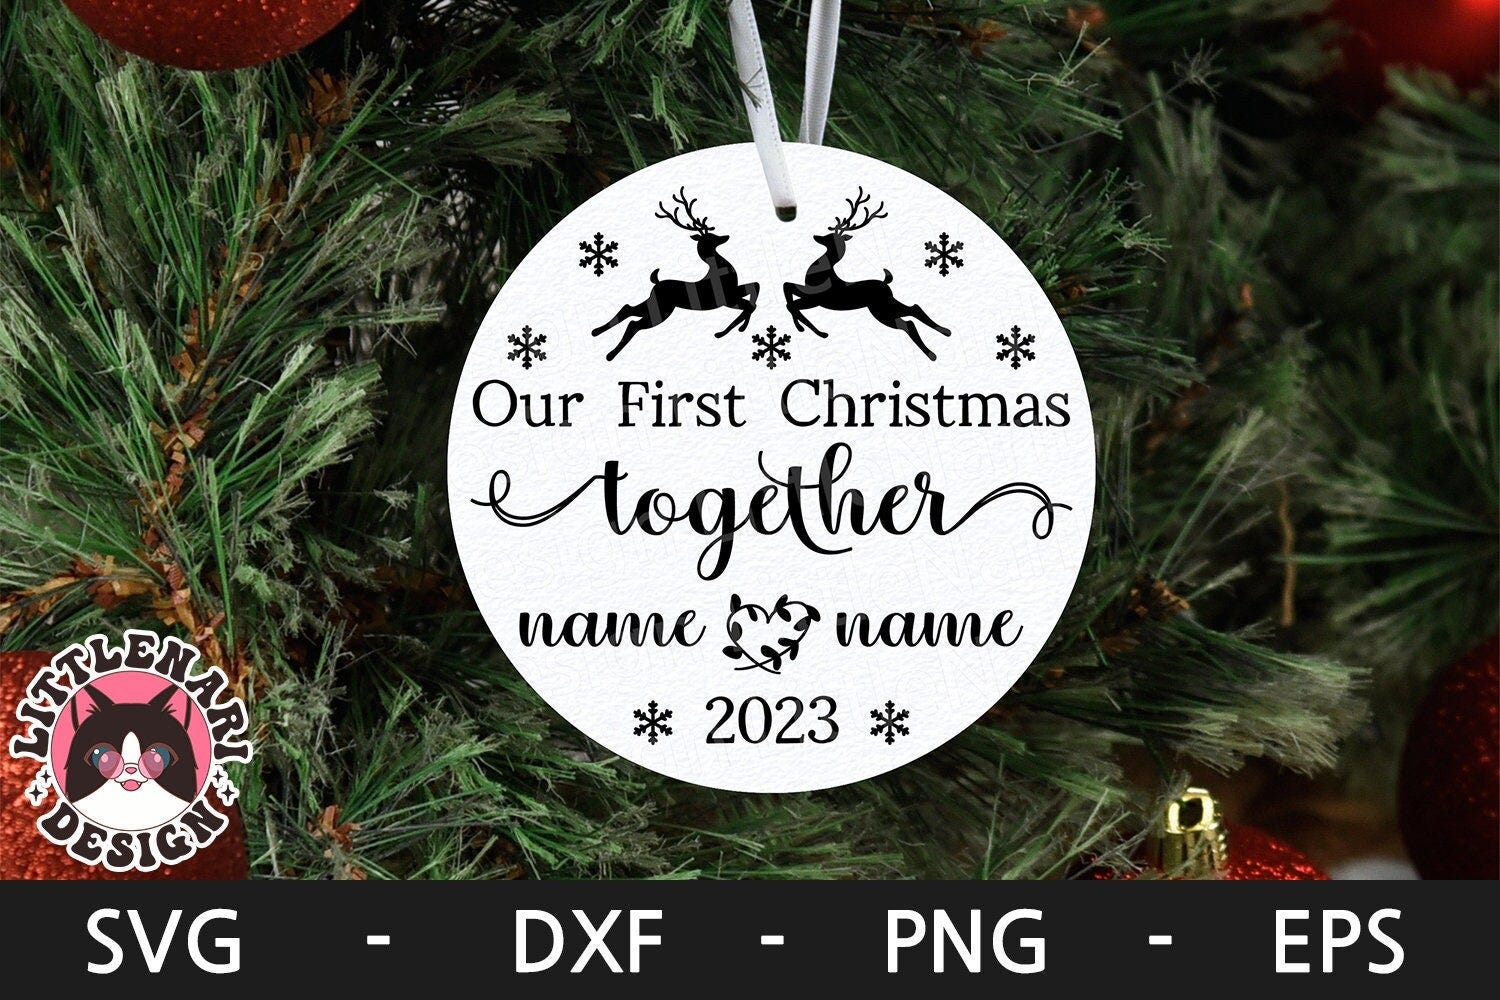 2023 Our First Christmas Together svg, Christmas Ornaments svg, Our First Christmas svg, dxf, png, eps, svg files for cricut